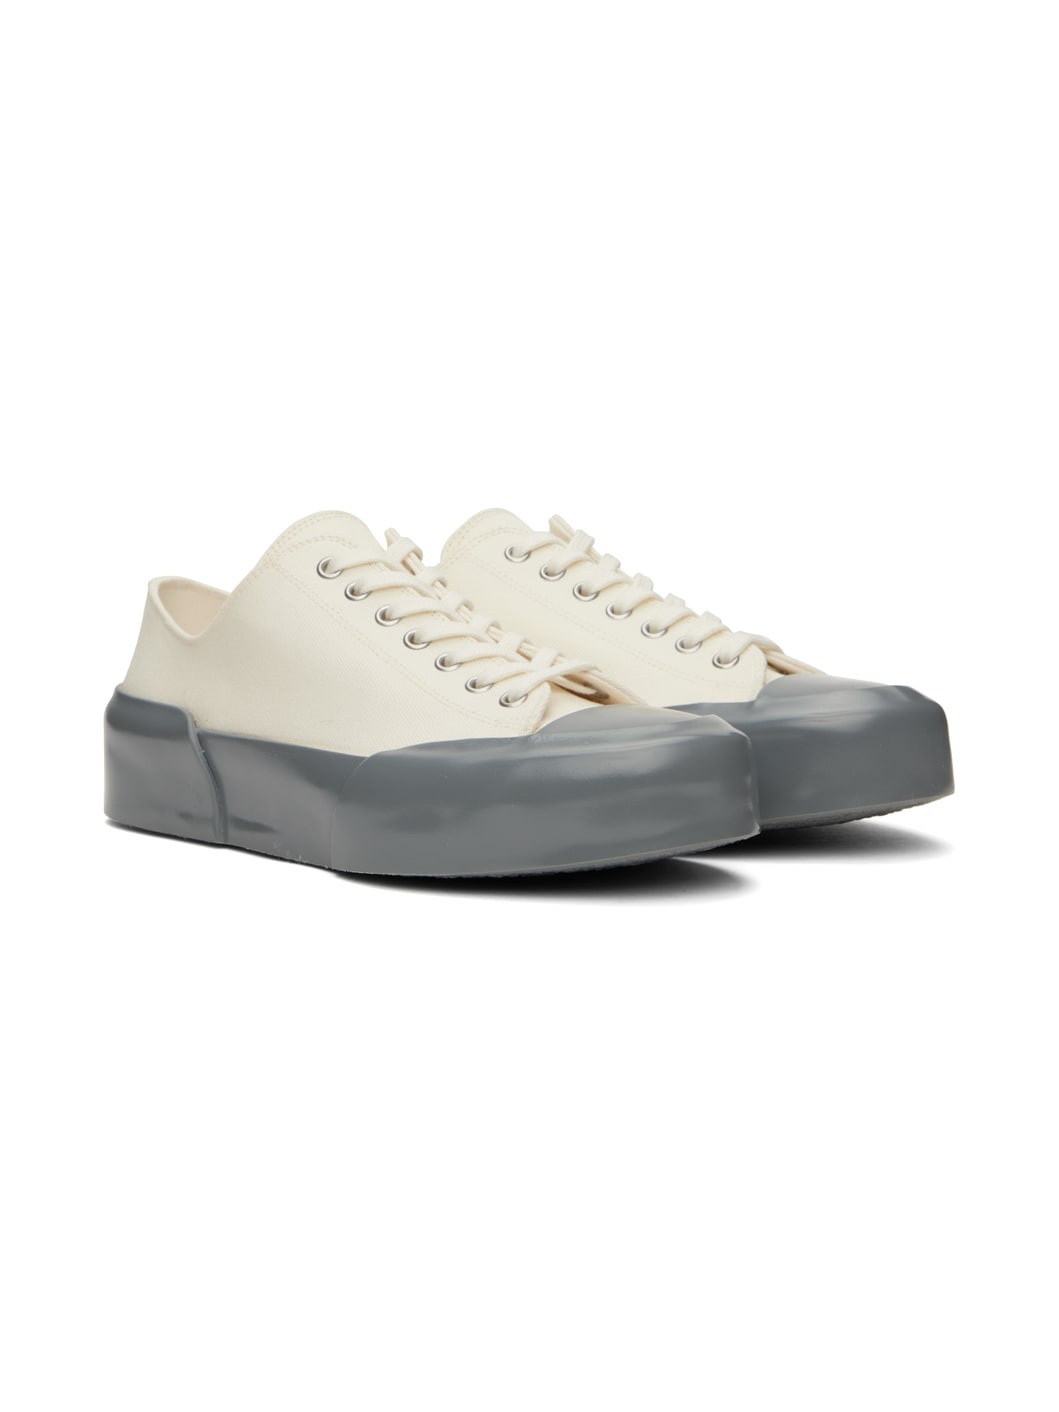 White & Gray Low-Top Sneakers - 4